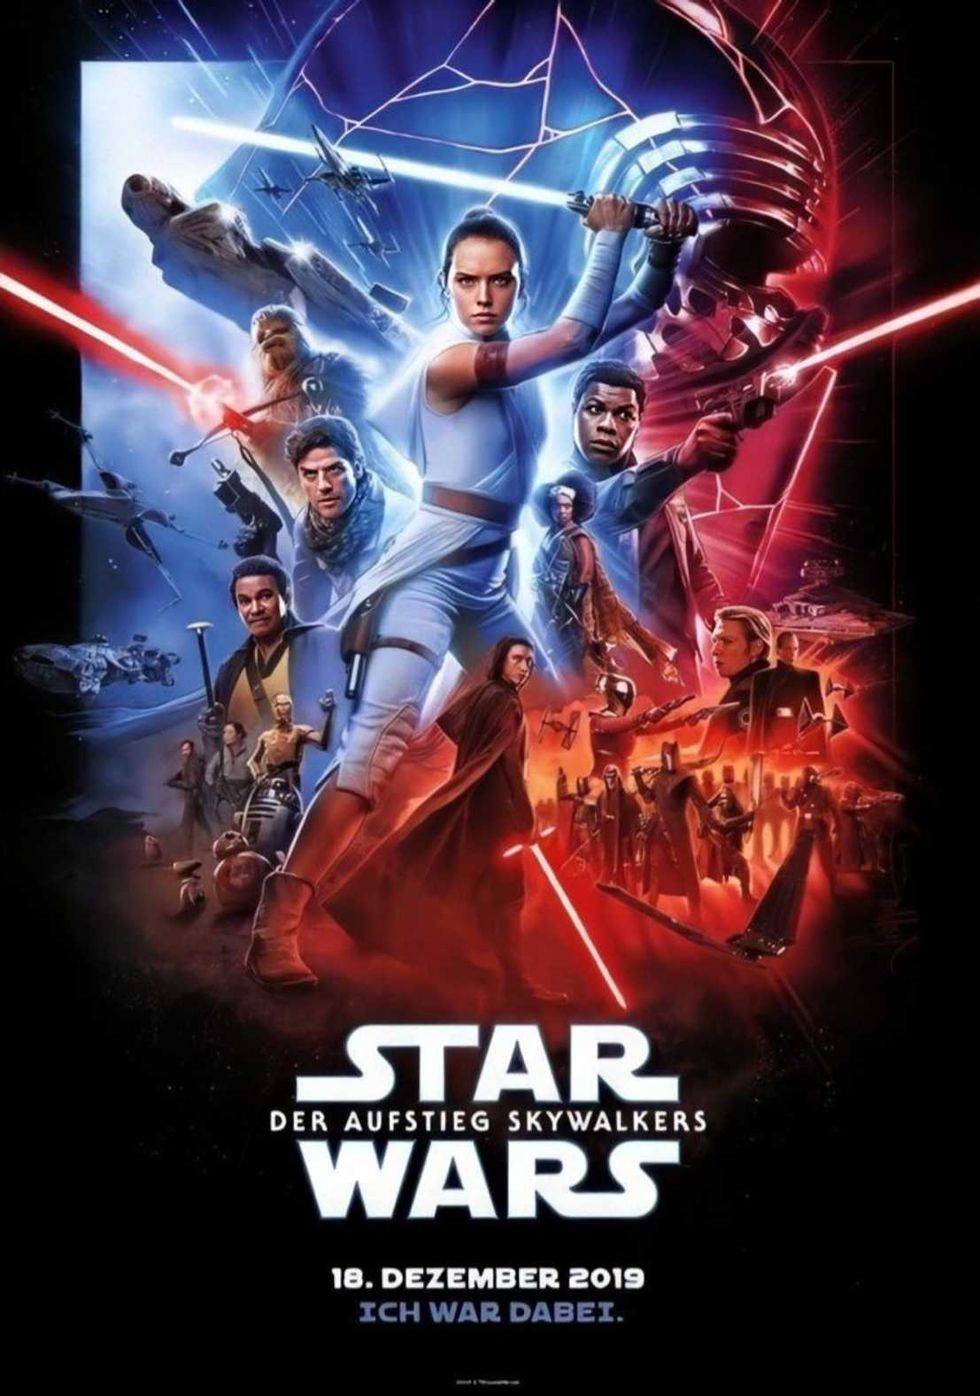 Star Wars: Episode 9 - The Rise of Skywalker' (2019) - This live